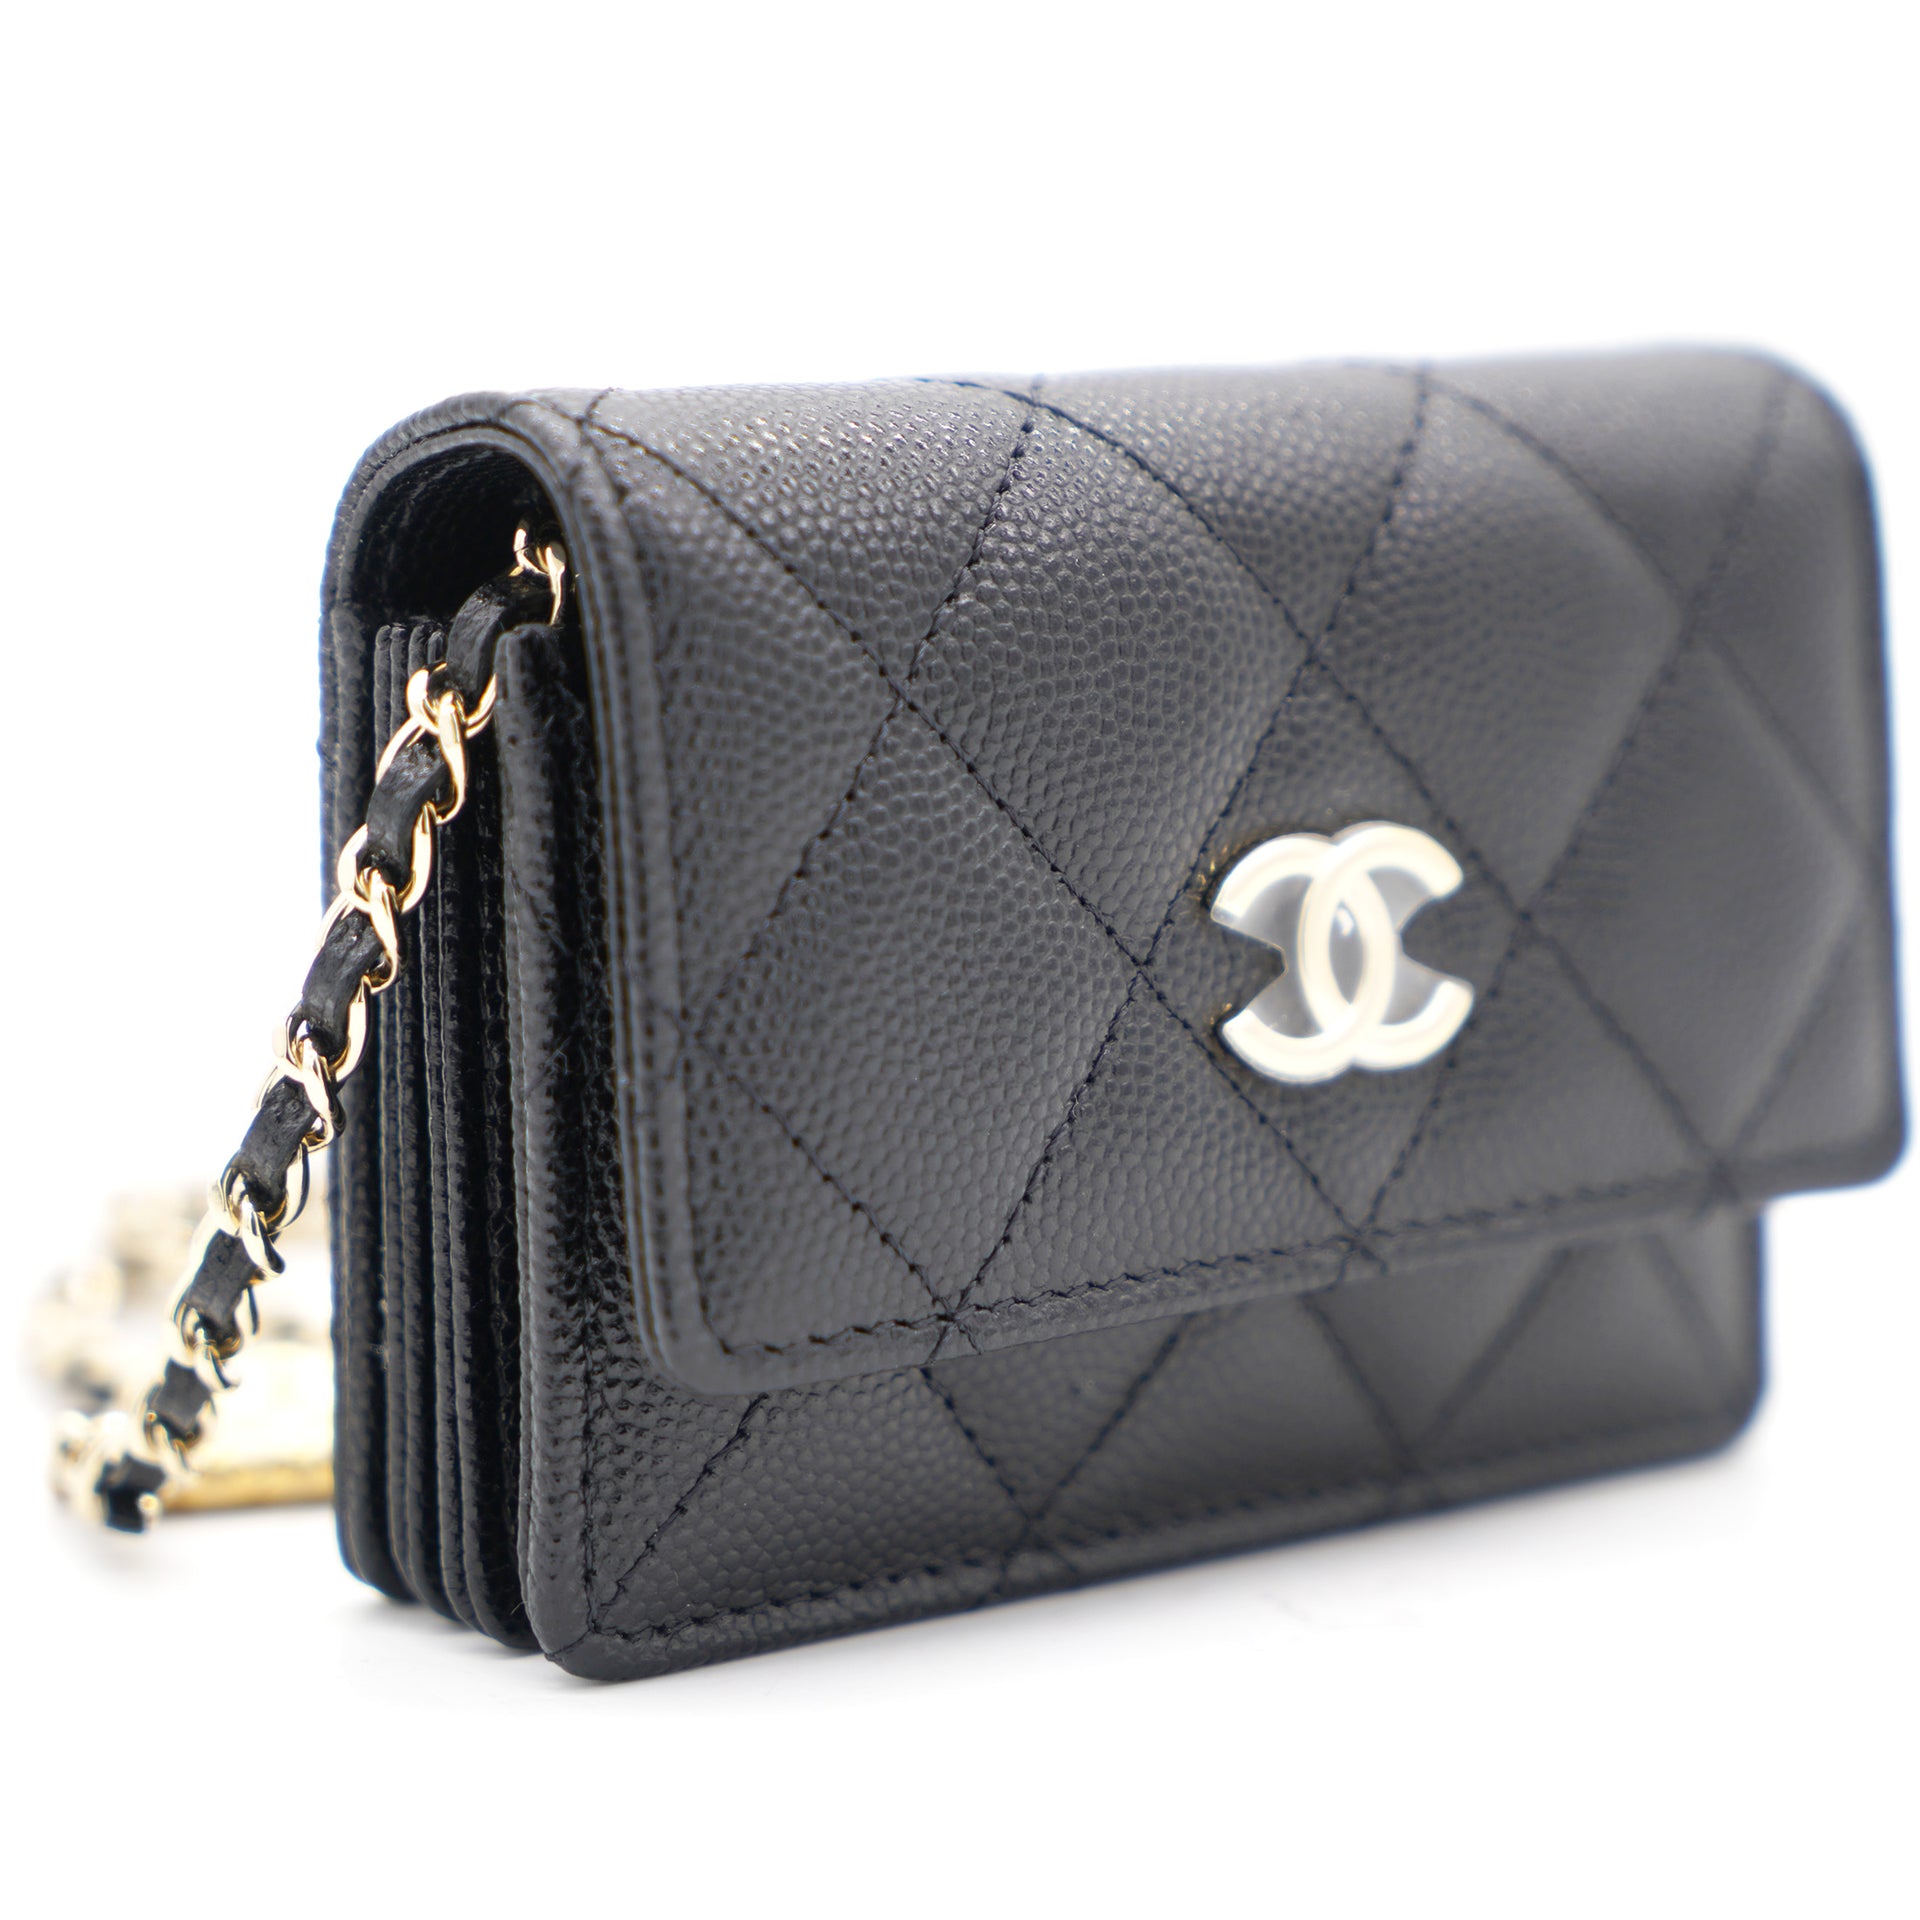 Black Quilted Caviar Leather Flap Card Holder with Charm Chain